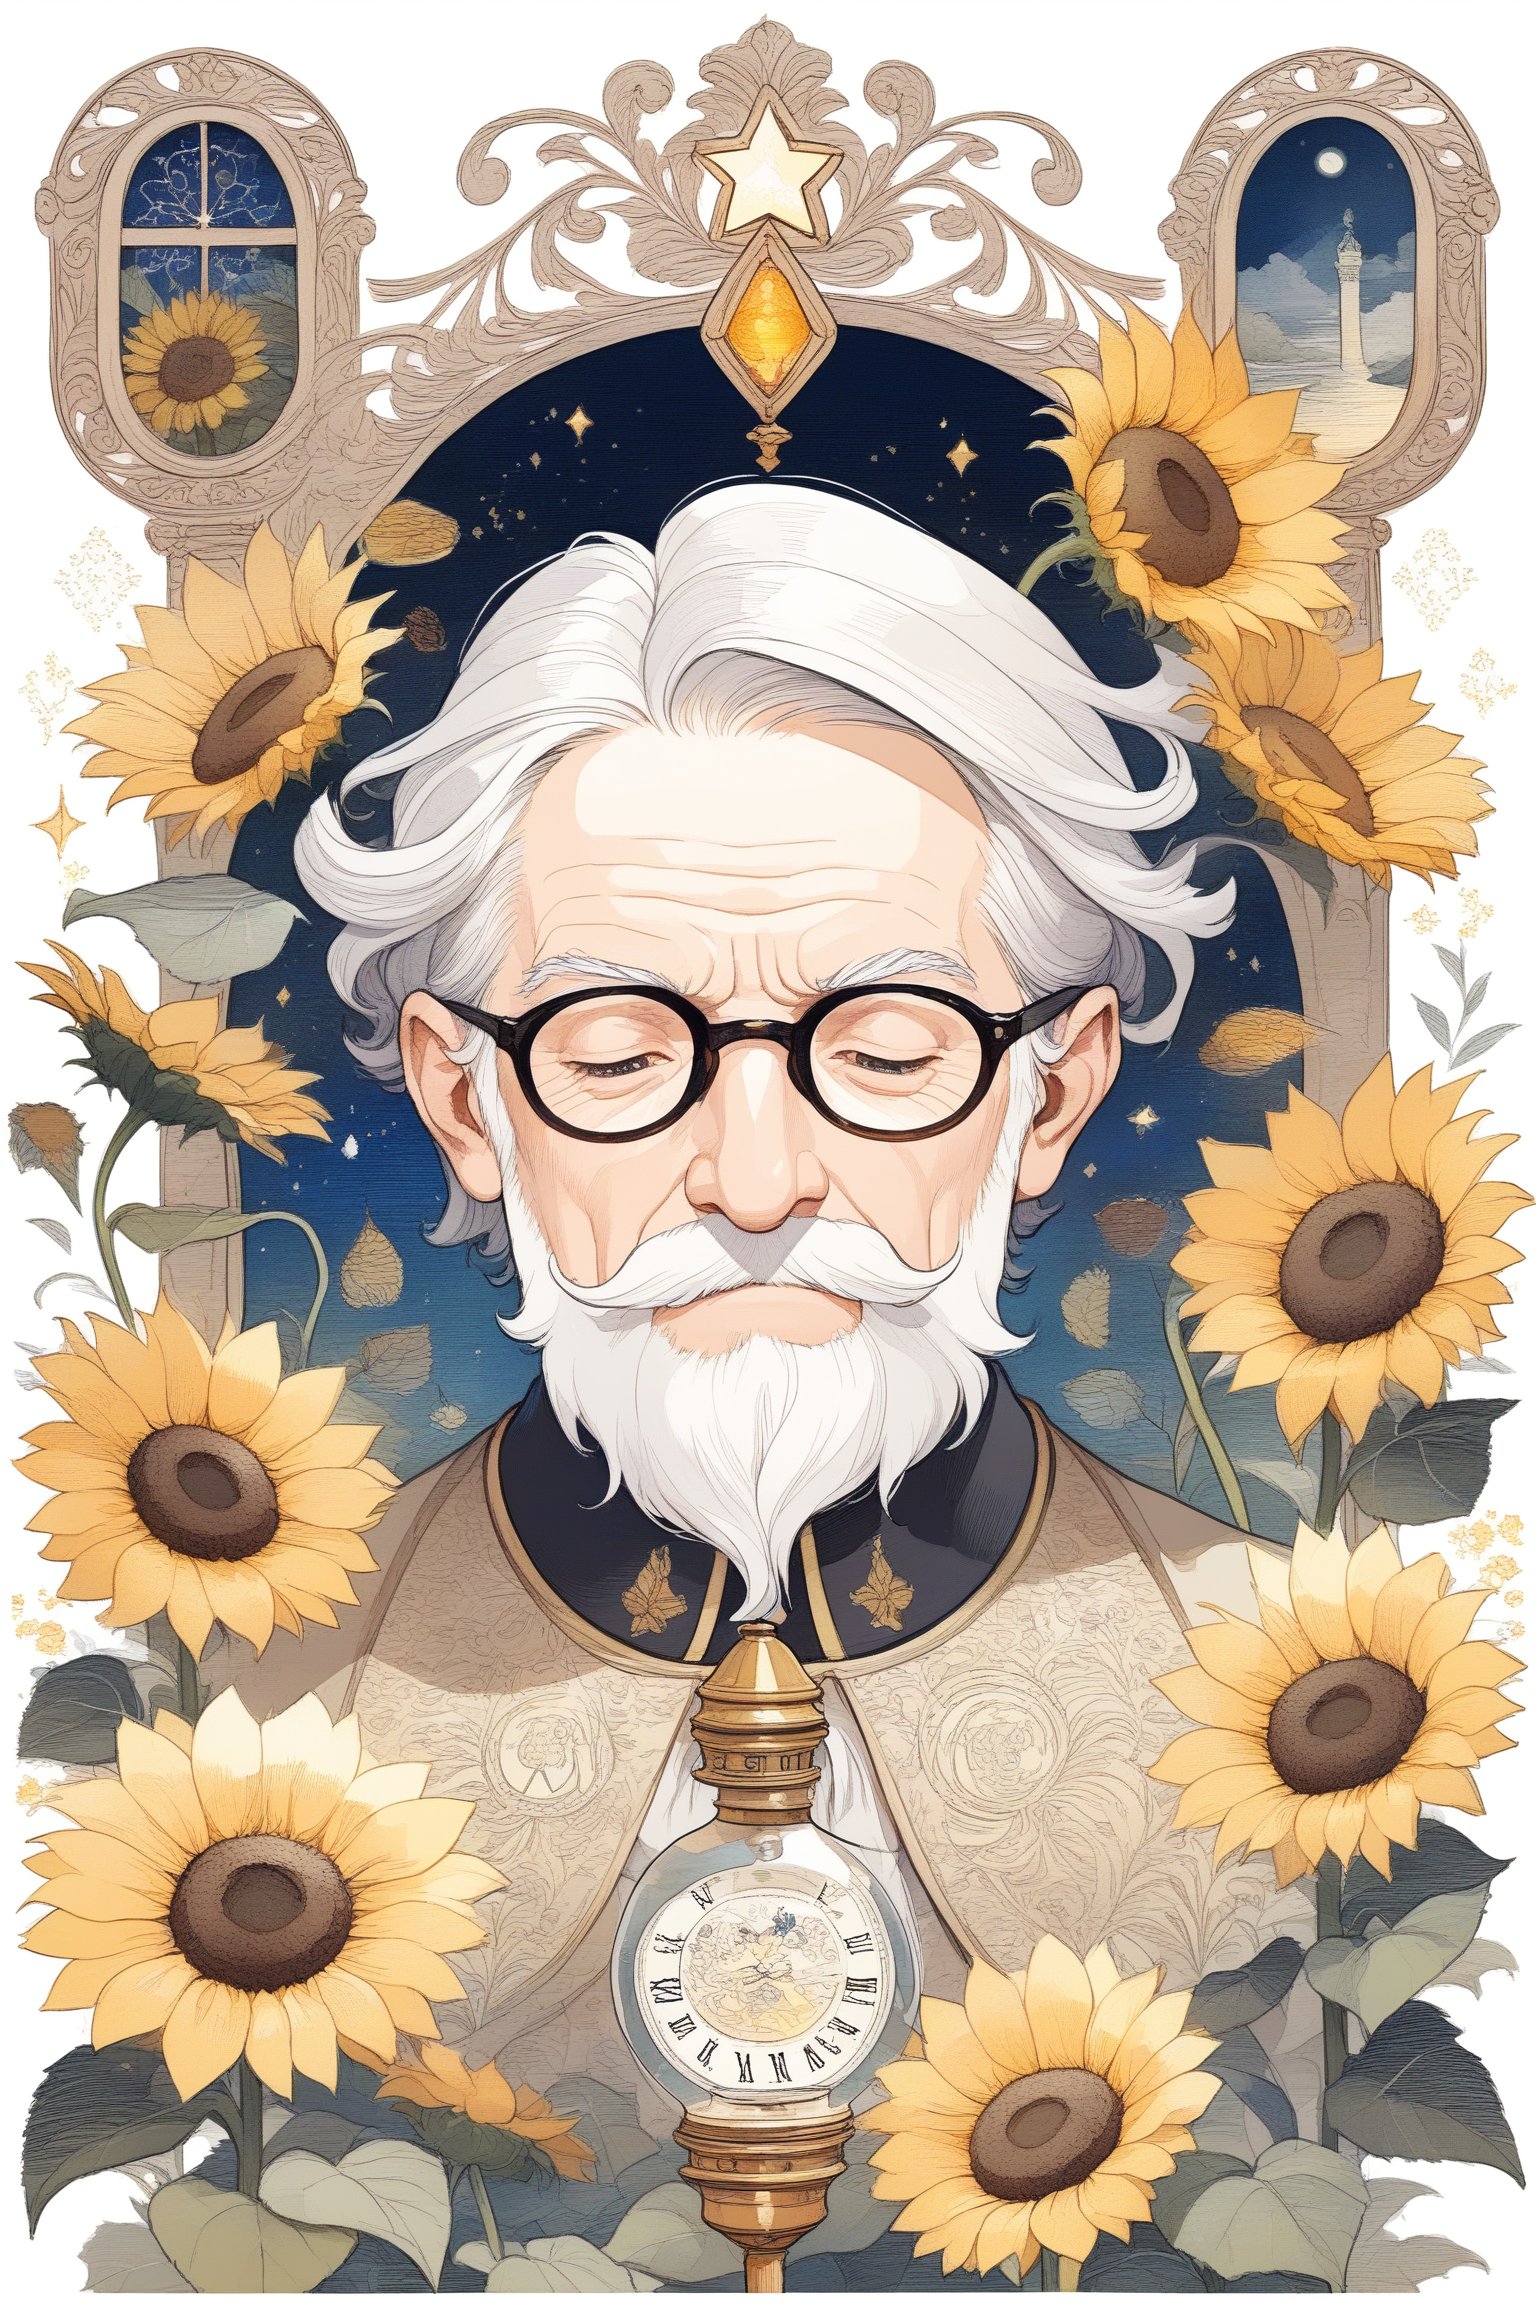 A lonely old man with a lantern, representing the search for inner knowledge and wisdom, fractal art (tarot card design), botanical illustration, sunflowers, classic and elegant flourish, Lofi art style, vintage, best quality, masterpiece, details extremely detailed and intricate, fractal art (tarot card design), botanical illustration, sunflowers, classic and elegant flourish, Lofi artistic style, vintage, [(text that says "EL LOCO")], best quality, masterpiece, extremely detailed and intricate details,